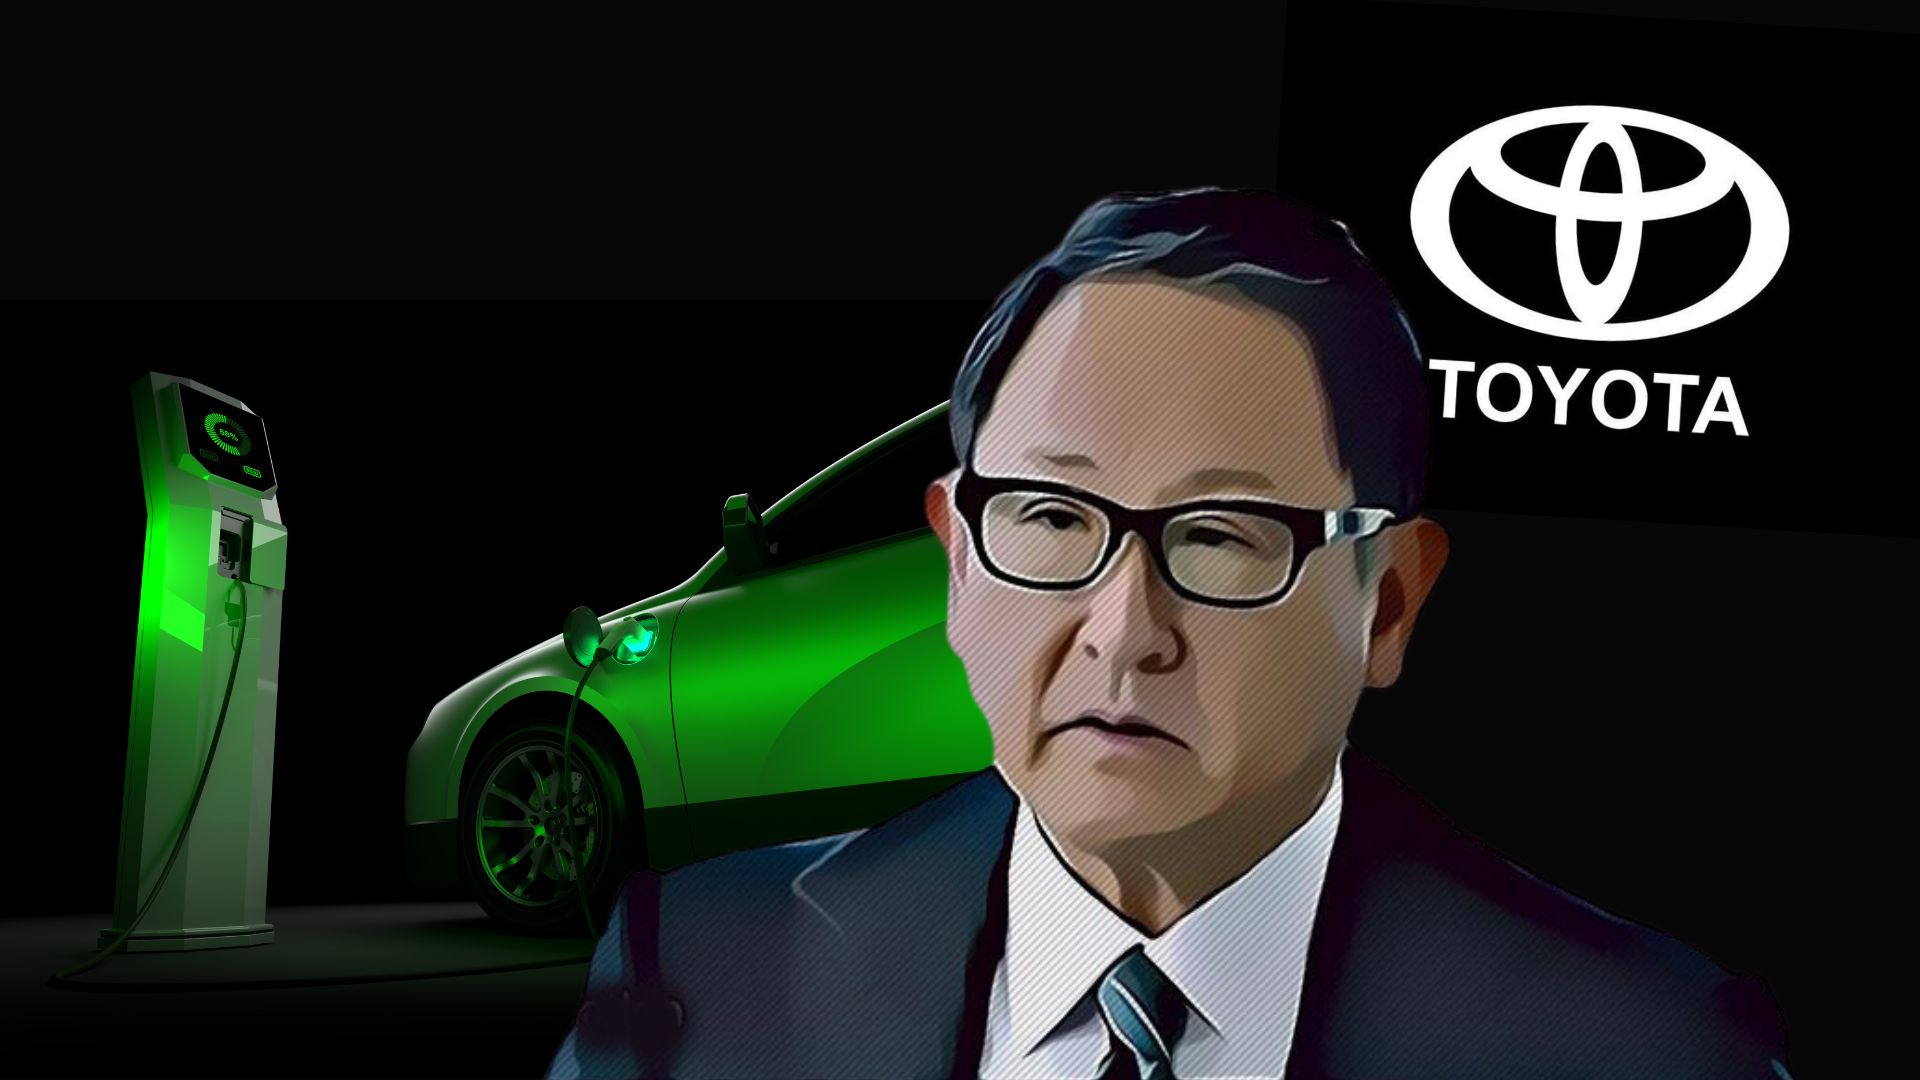 Why does Mr. Toyota reject electric cars?